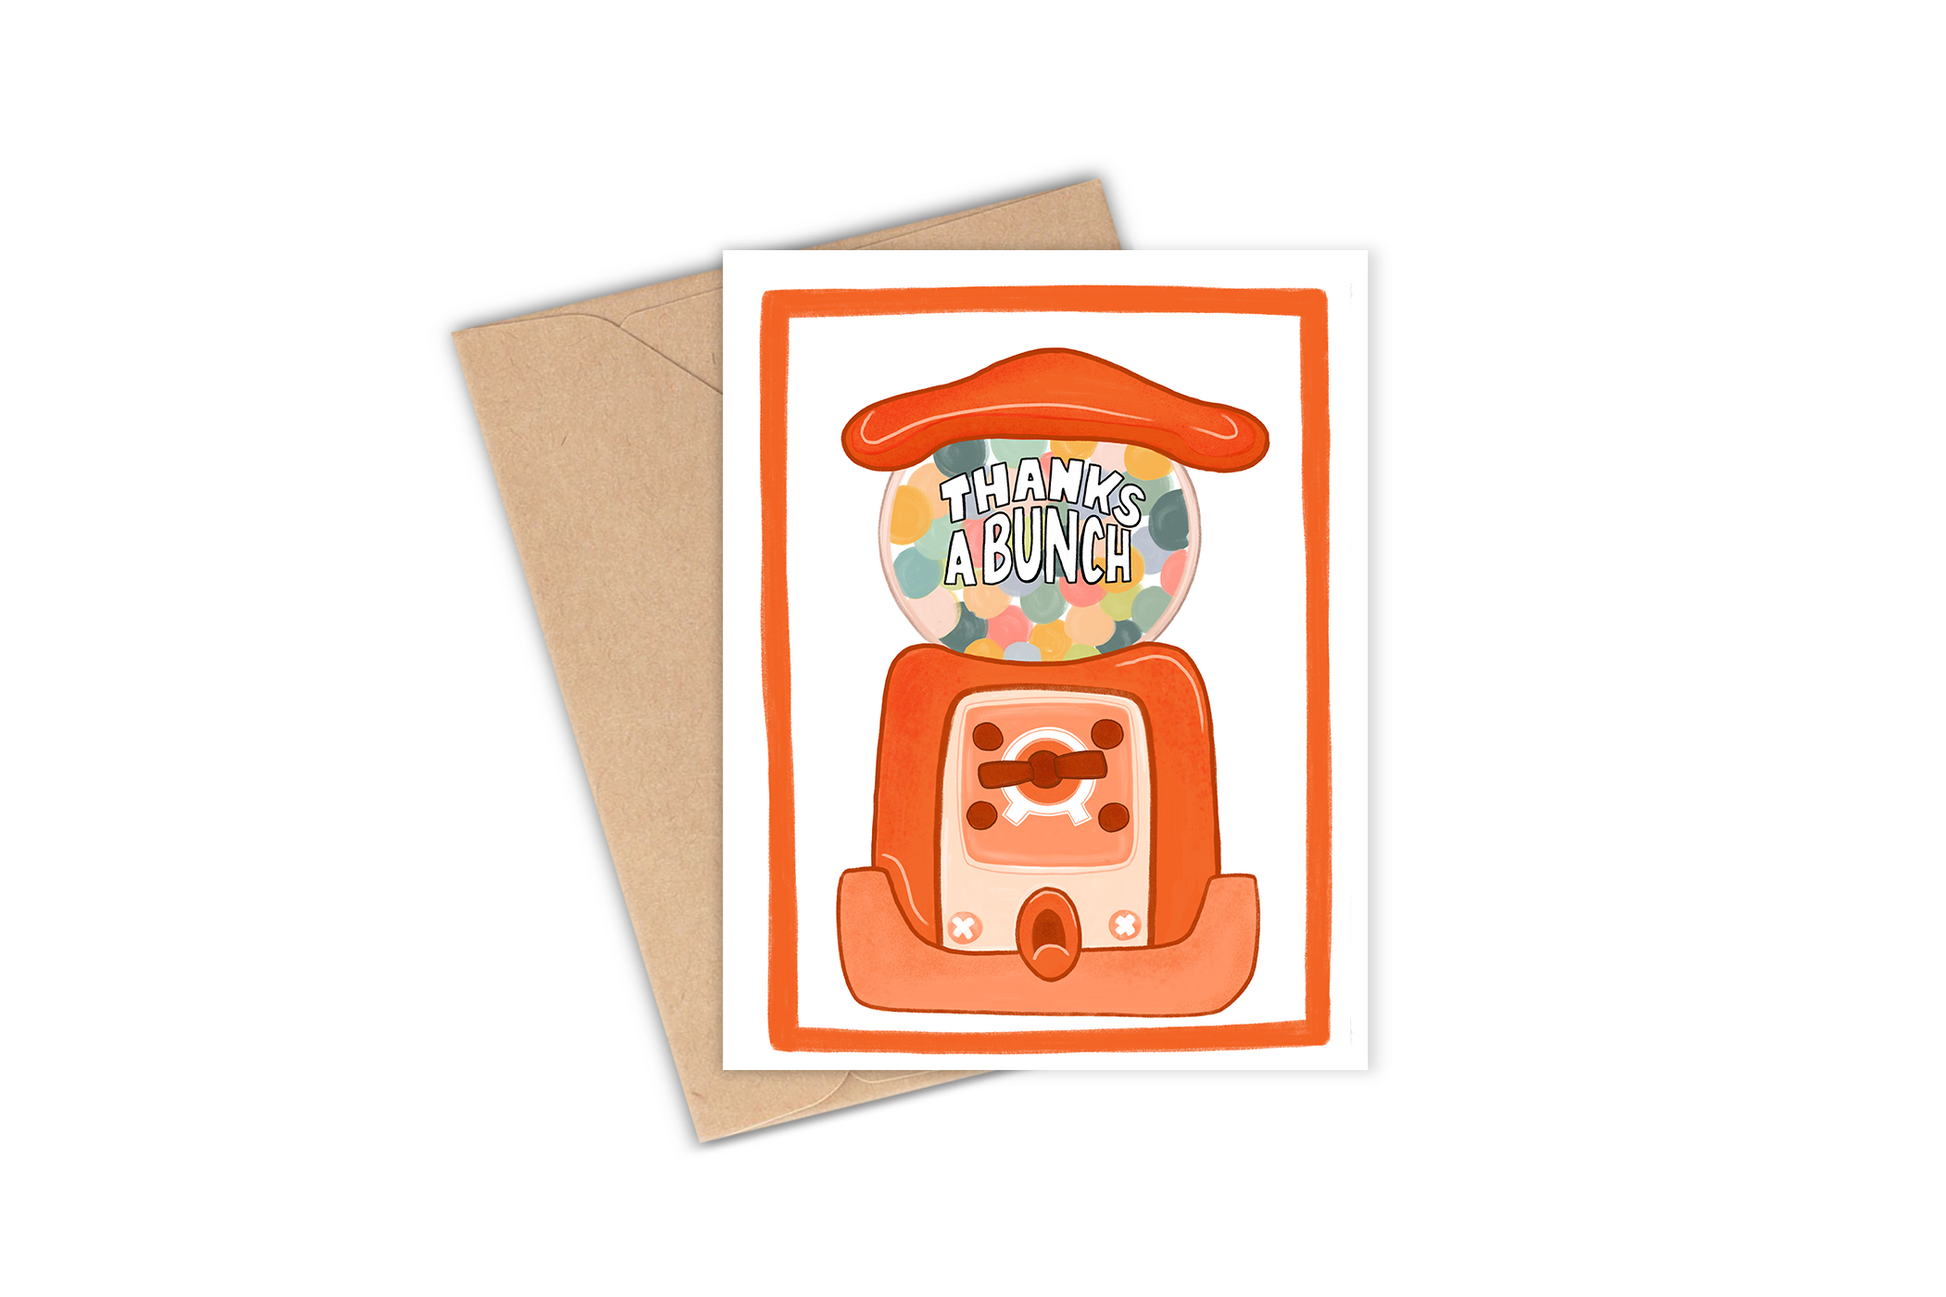 This greeting card is perfect to say thank you - perfect card to give after a birthday party or another type of event.  Details: Hand-illustrated drawing of a vintage/retro looking gumball machine with the phrase "Thanks a bunch".